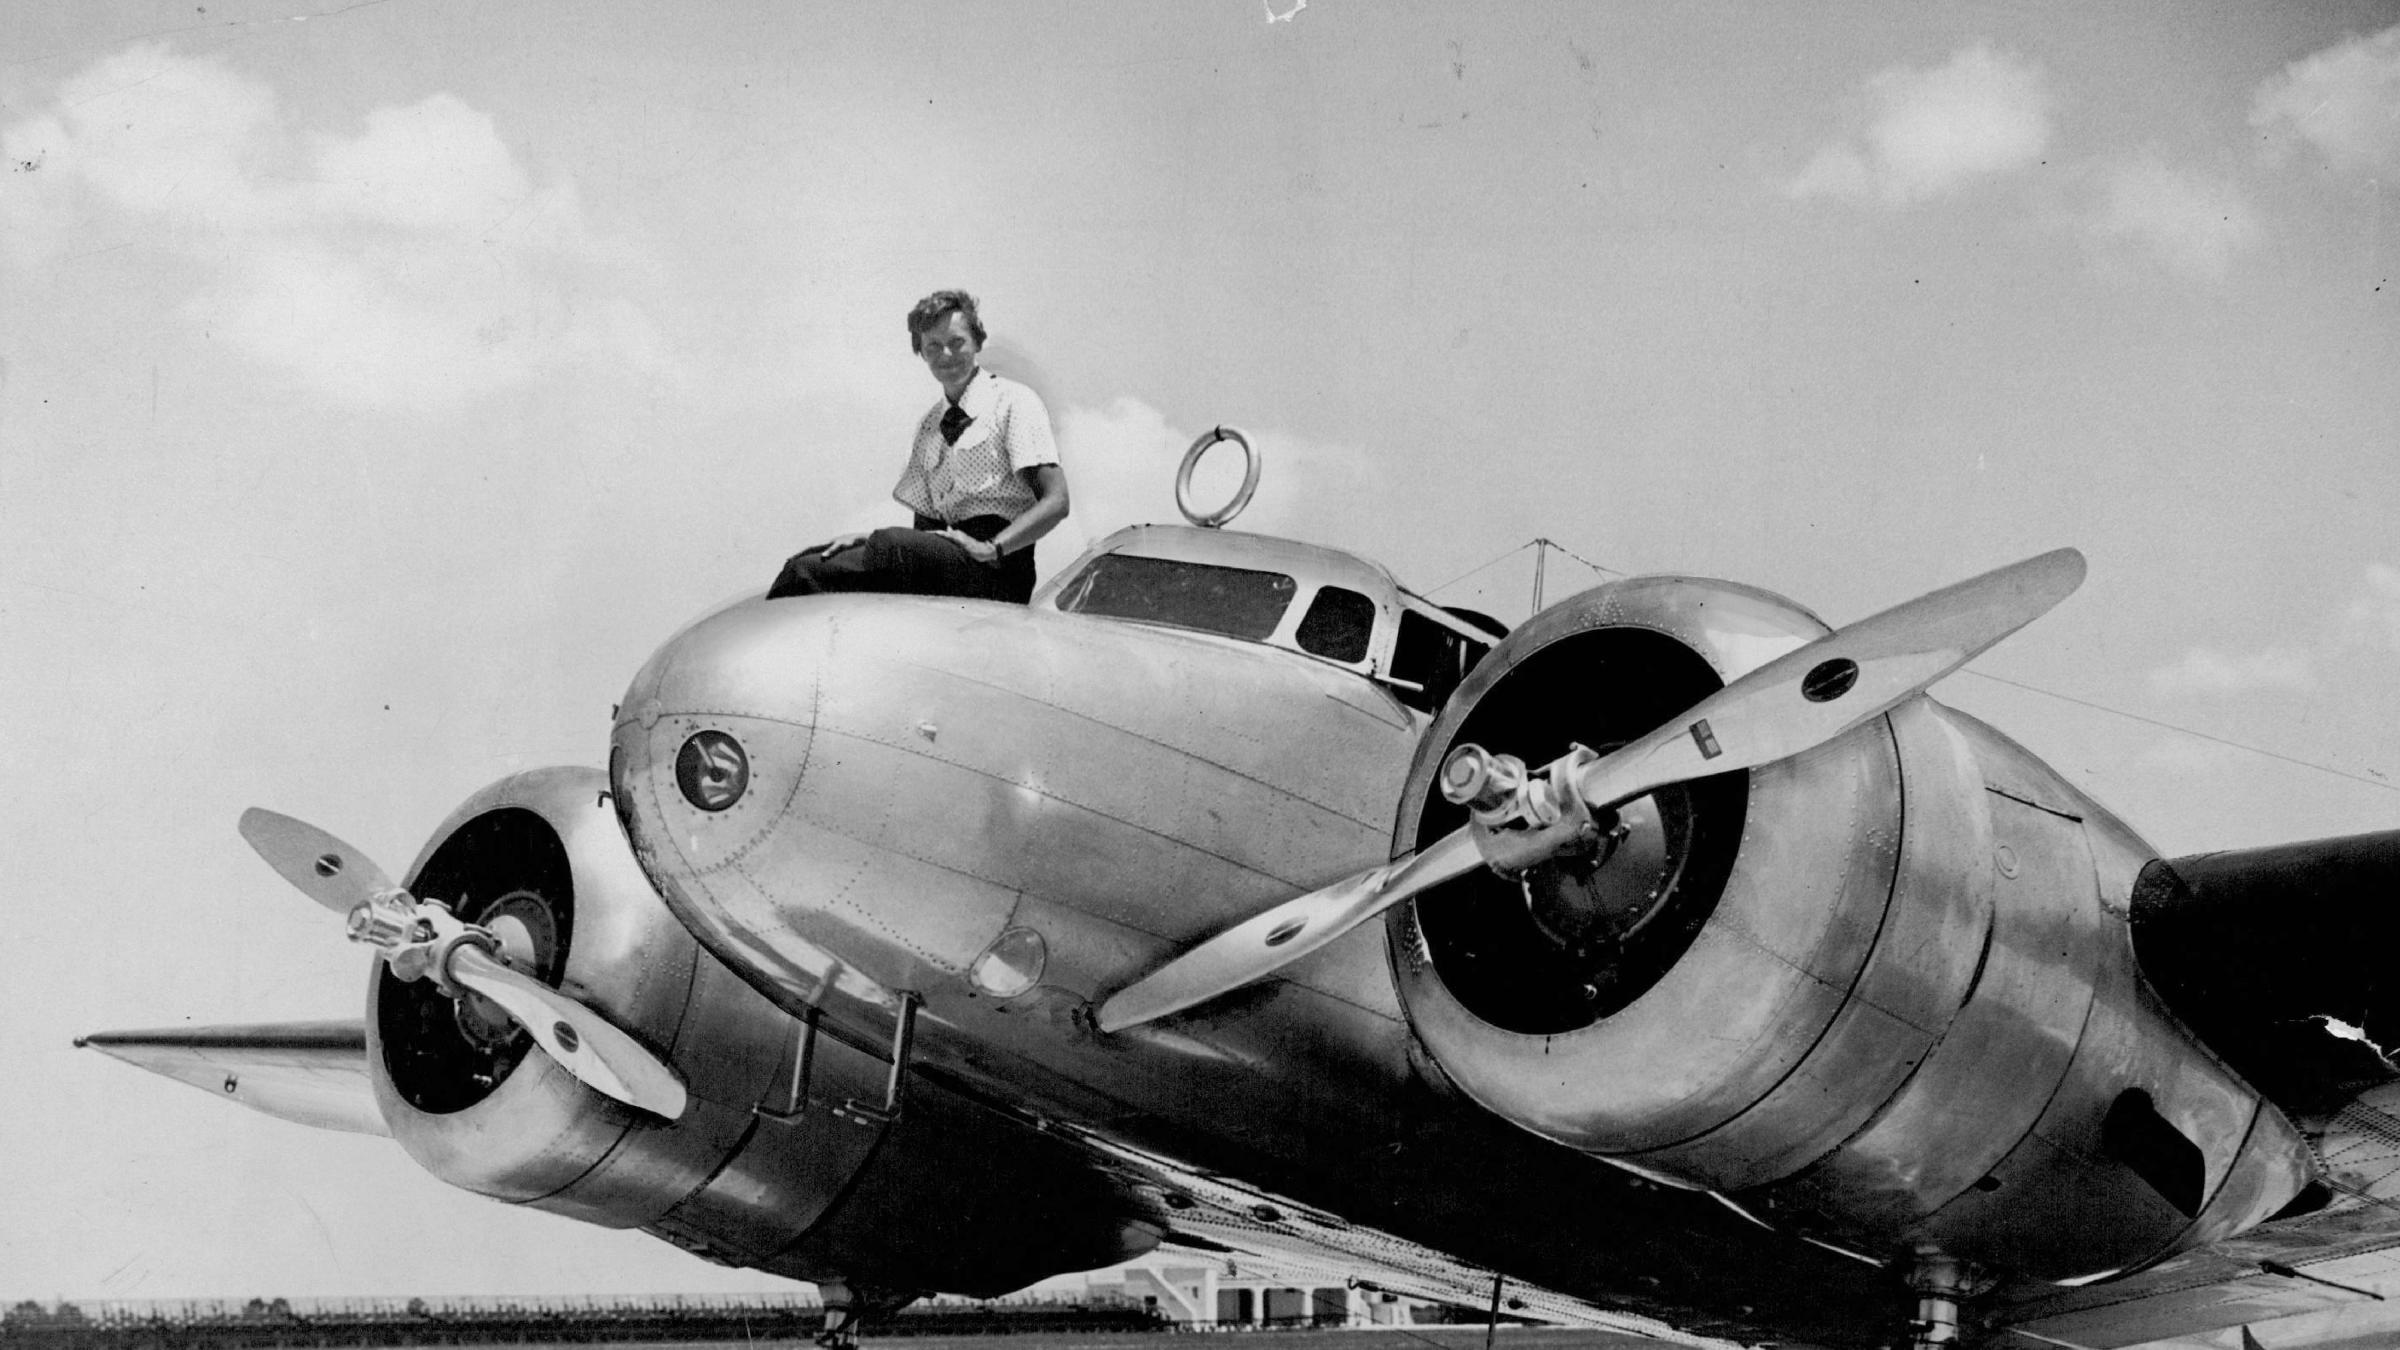 Does This Solve The Amelia Earhart Mystery Once And For All?